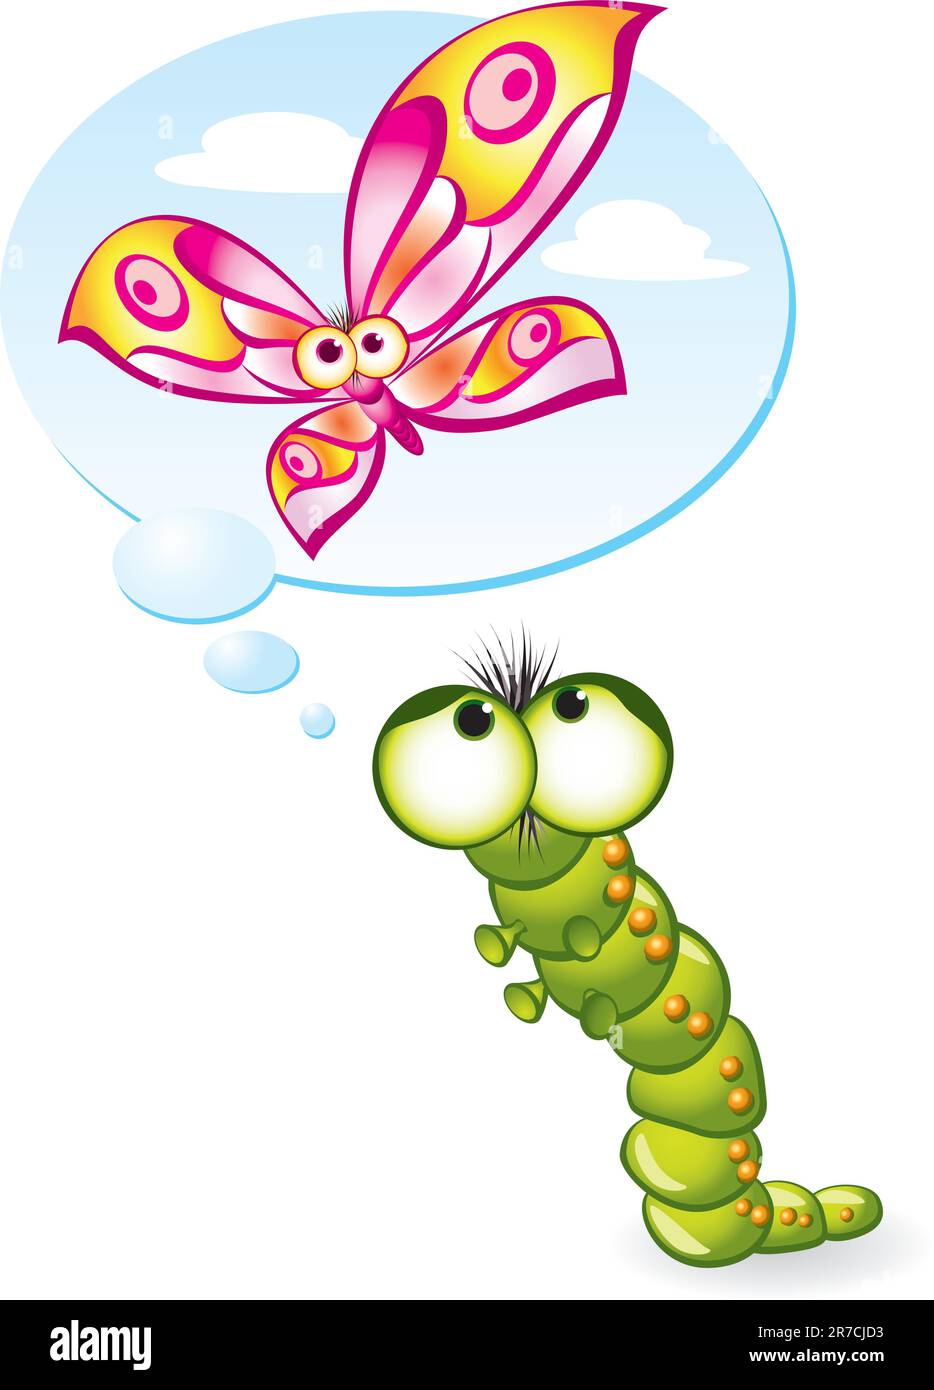 Caterpillar wants to become a butterfly. Illustration on white background Stock Vector